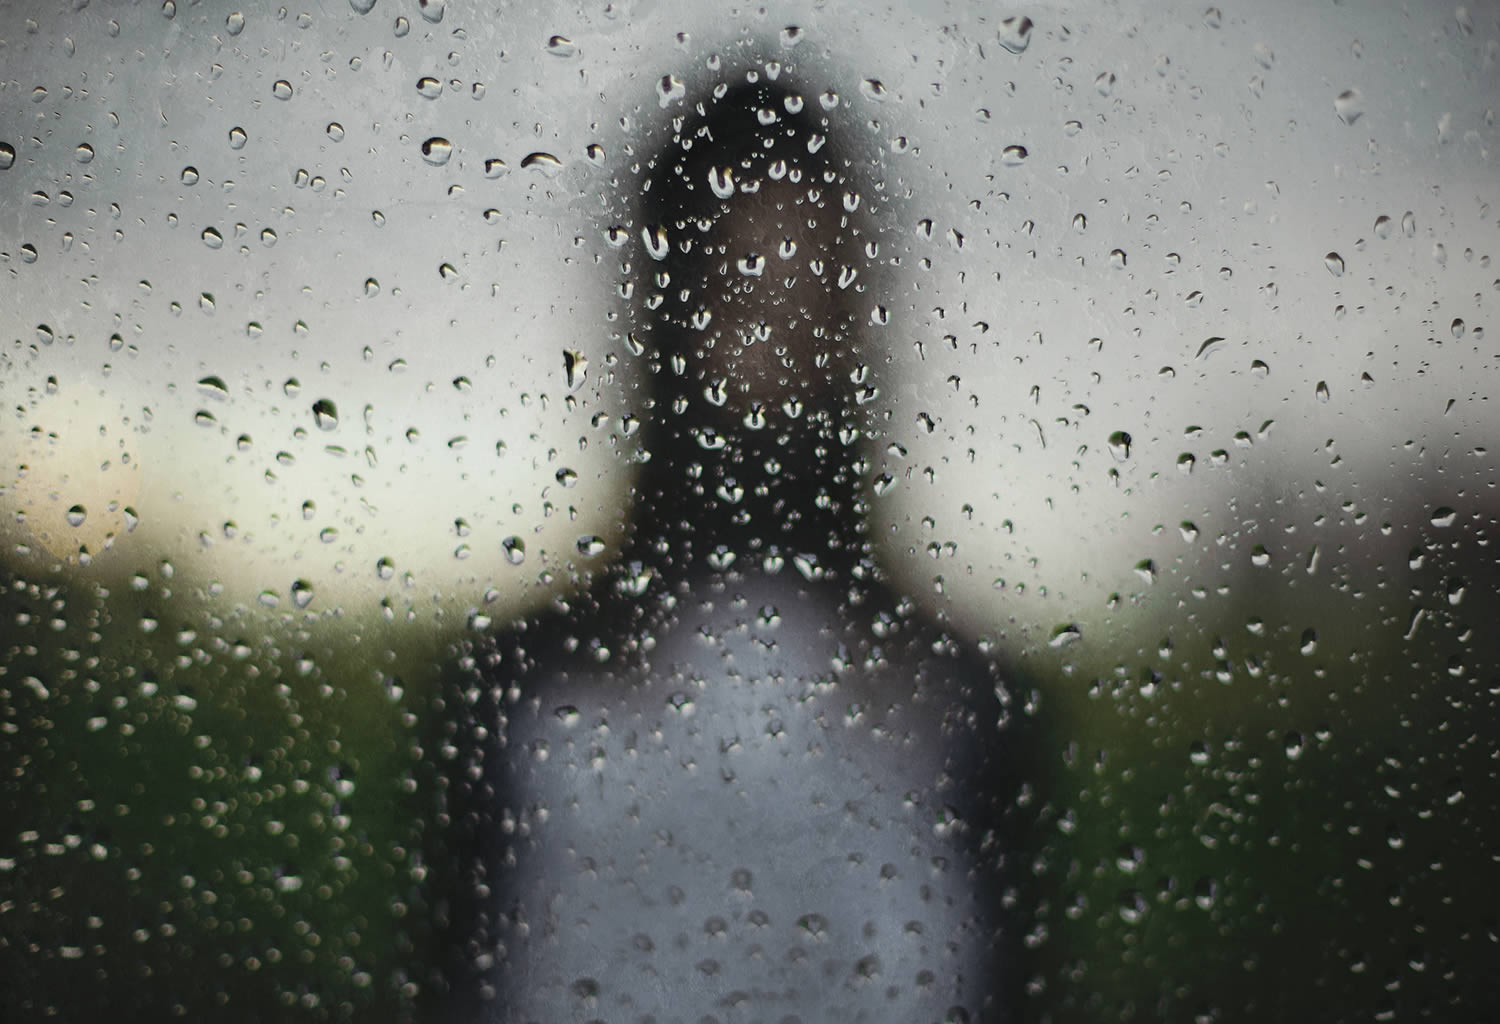 "101/365: in rain or shine" by Alex Currie.